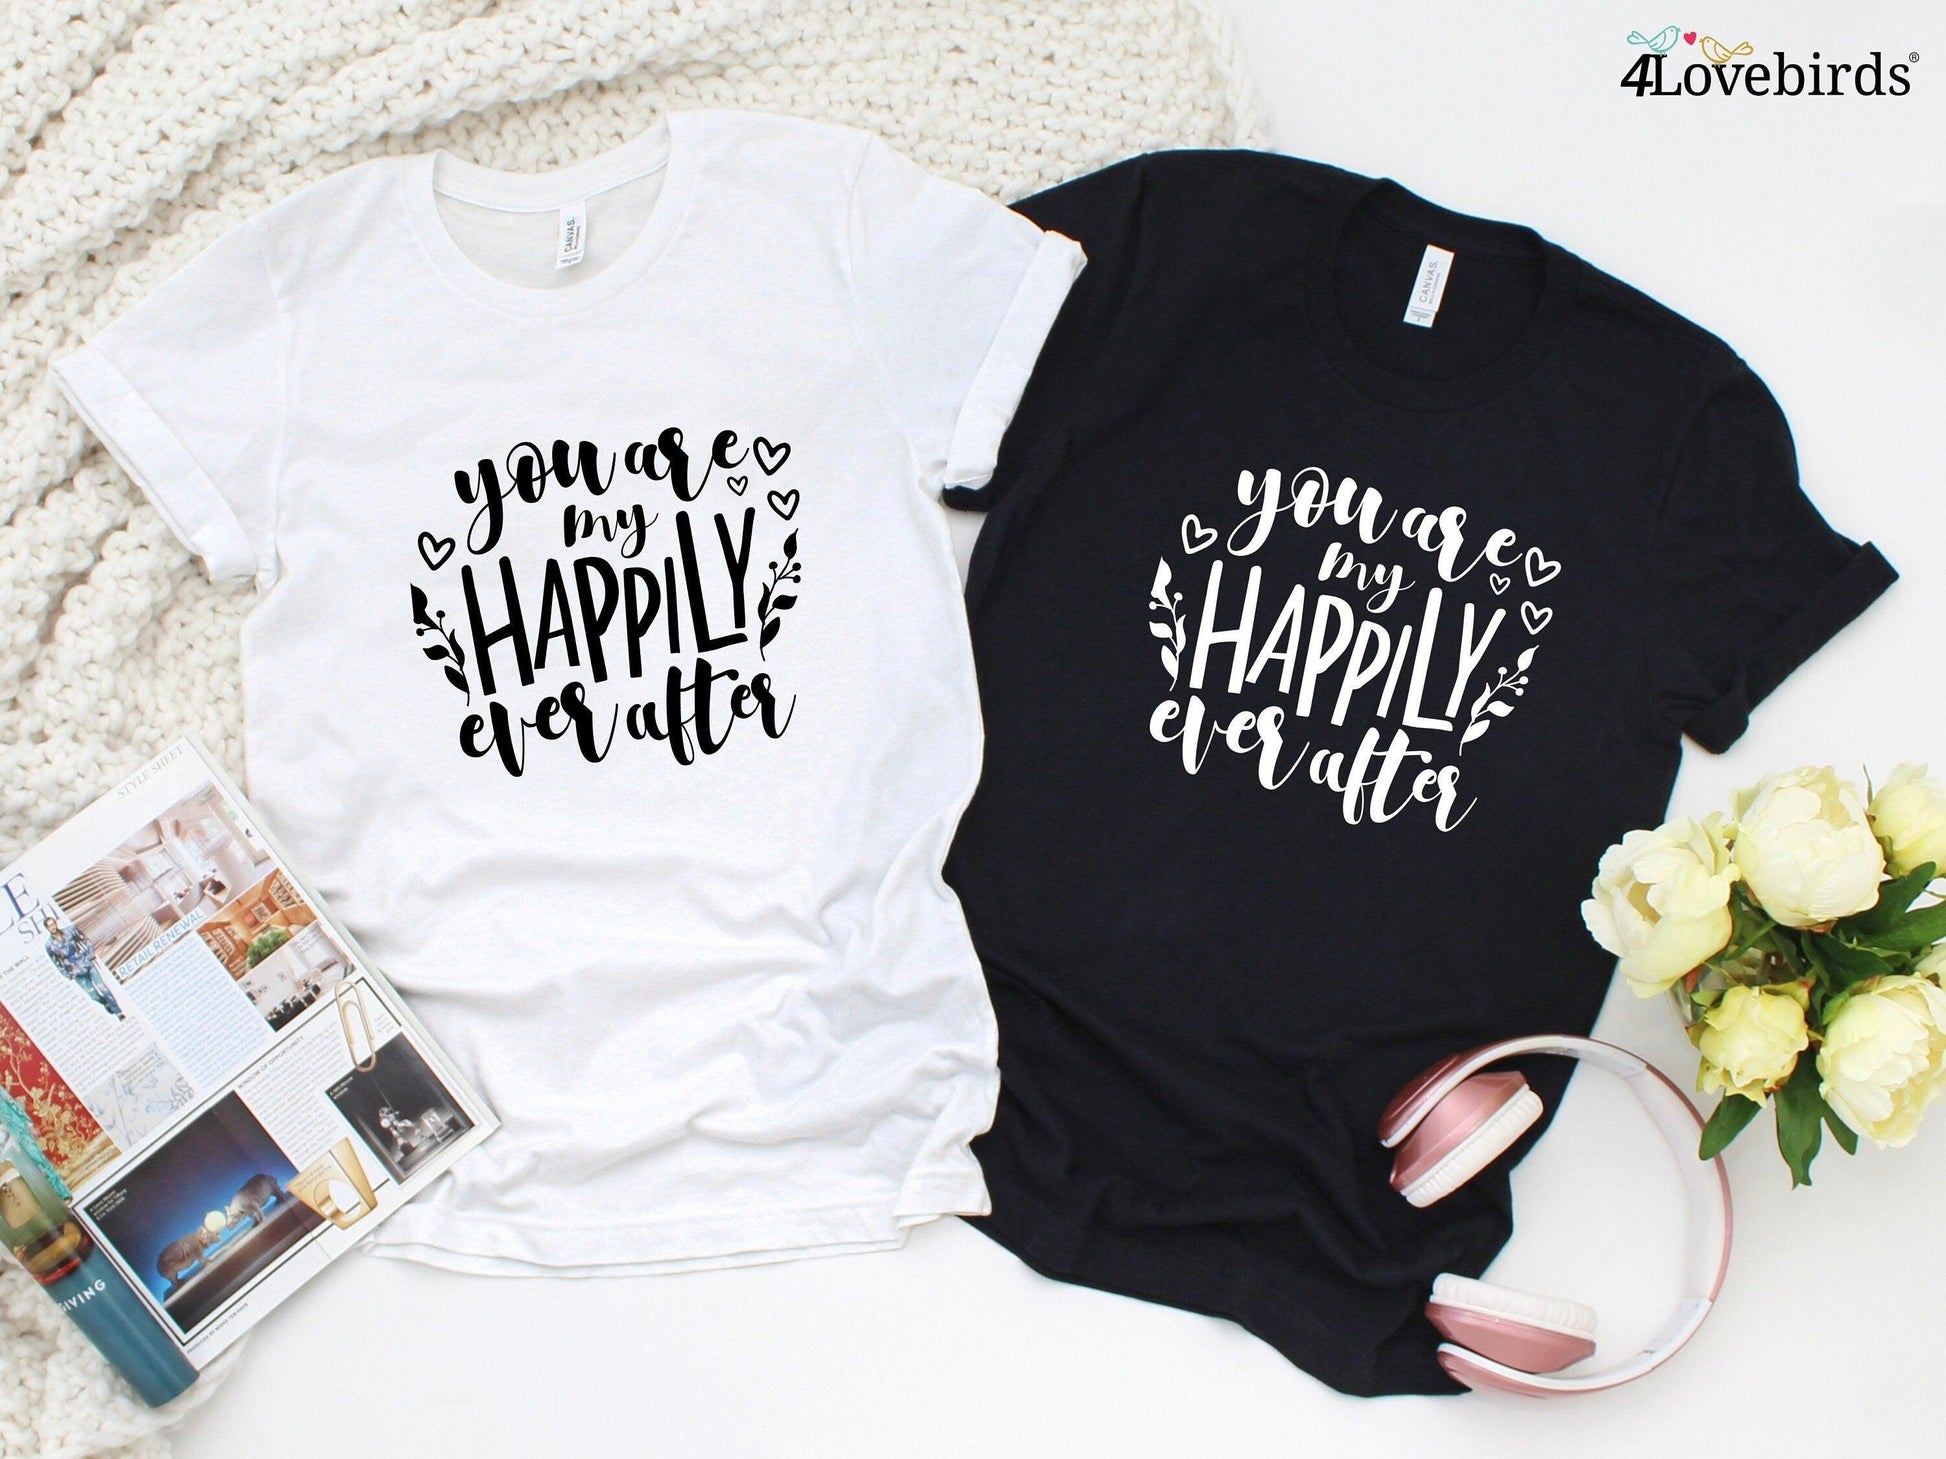 You are my happily ever after Hoodie, Lovers T-shirt, Gift for Couples, Valentine Sweatshirt, Boyfriend / Girlfriend Longsleeve, Cute Tshirt - 4Lovebirds